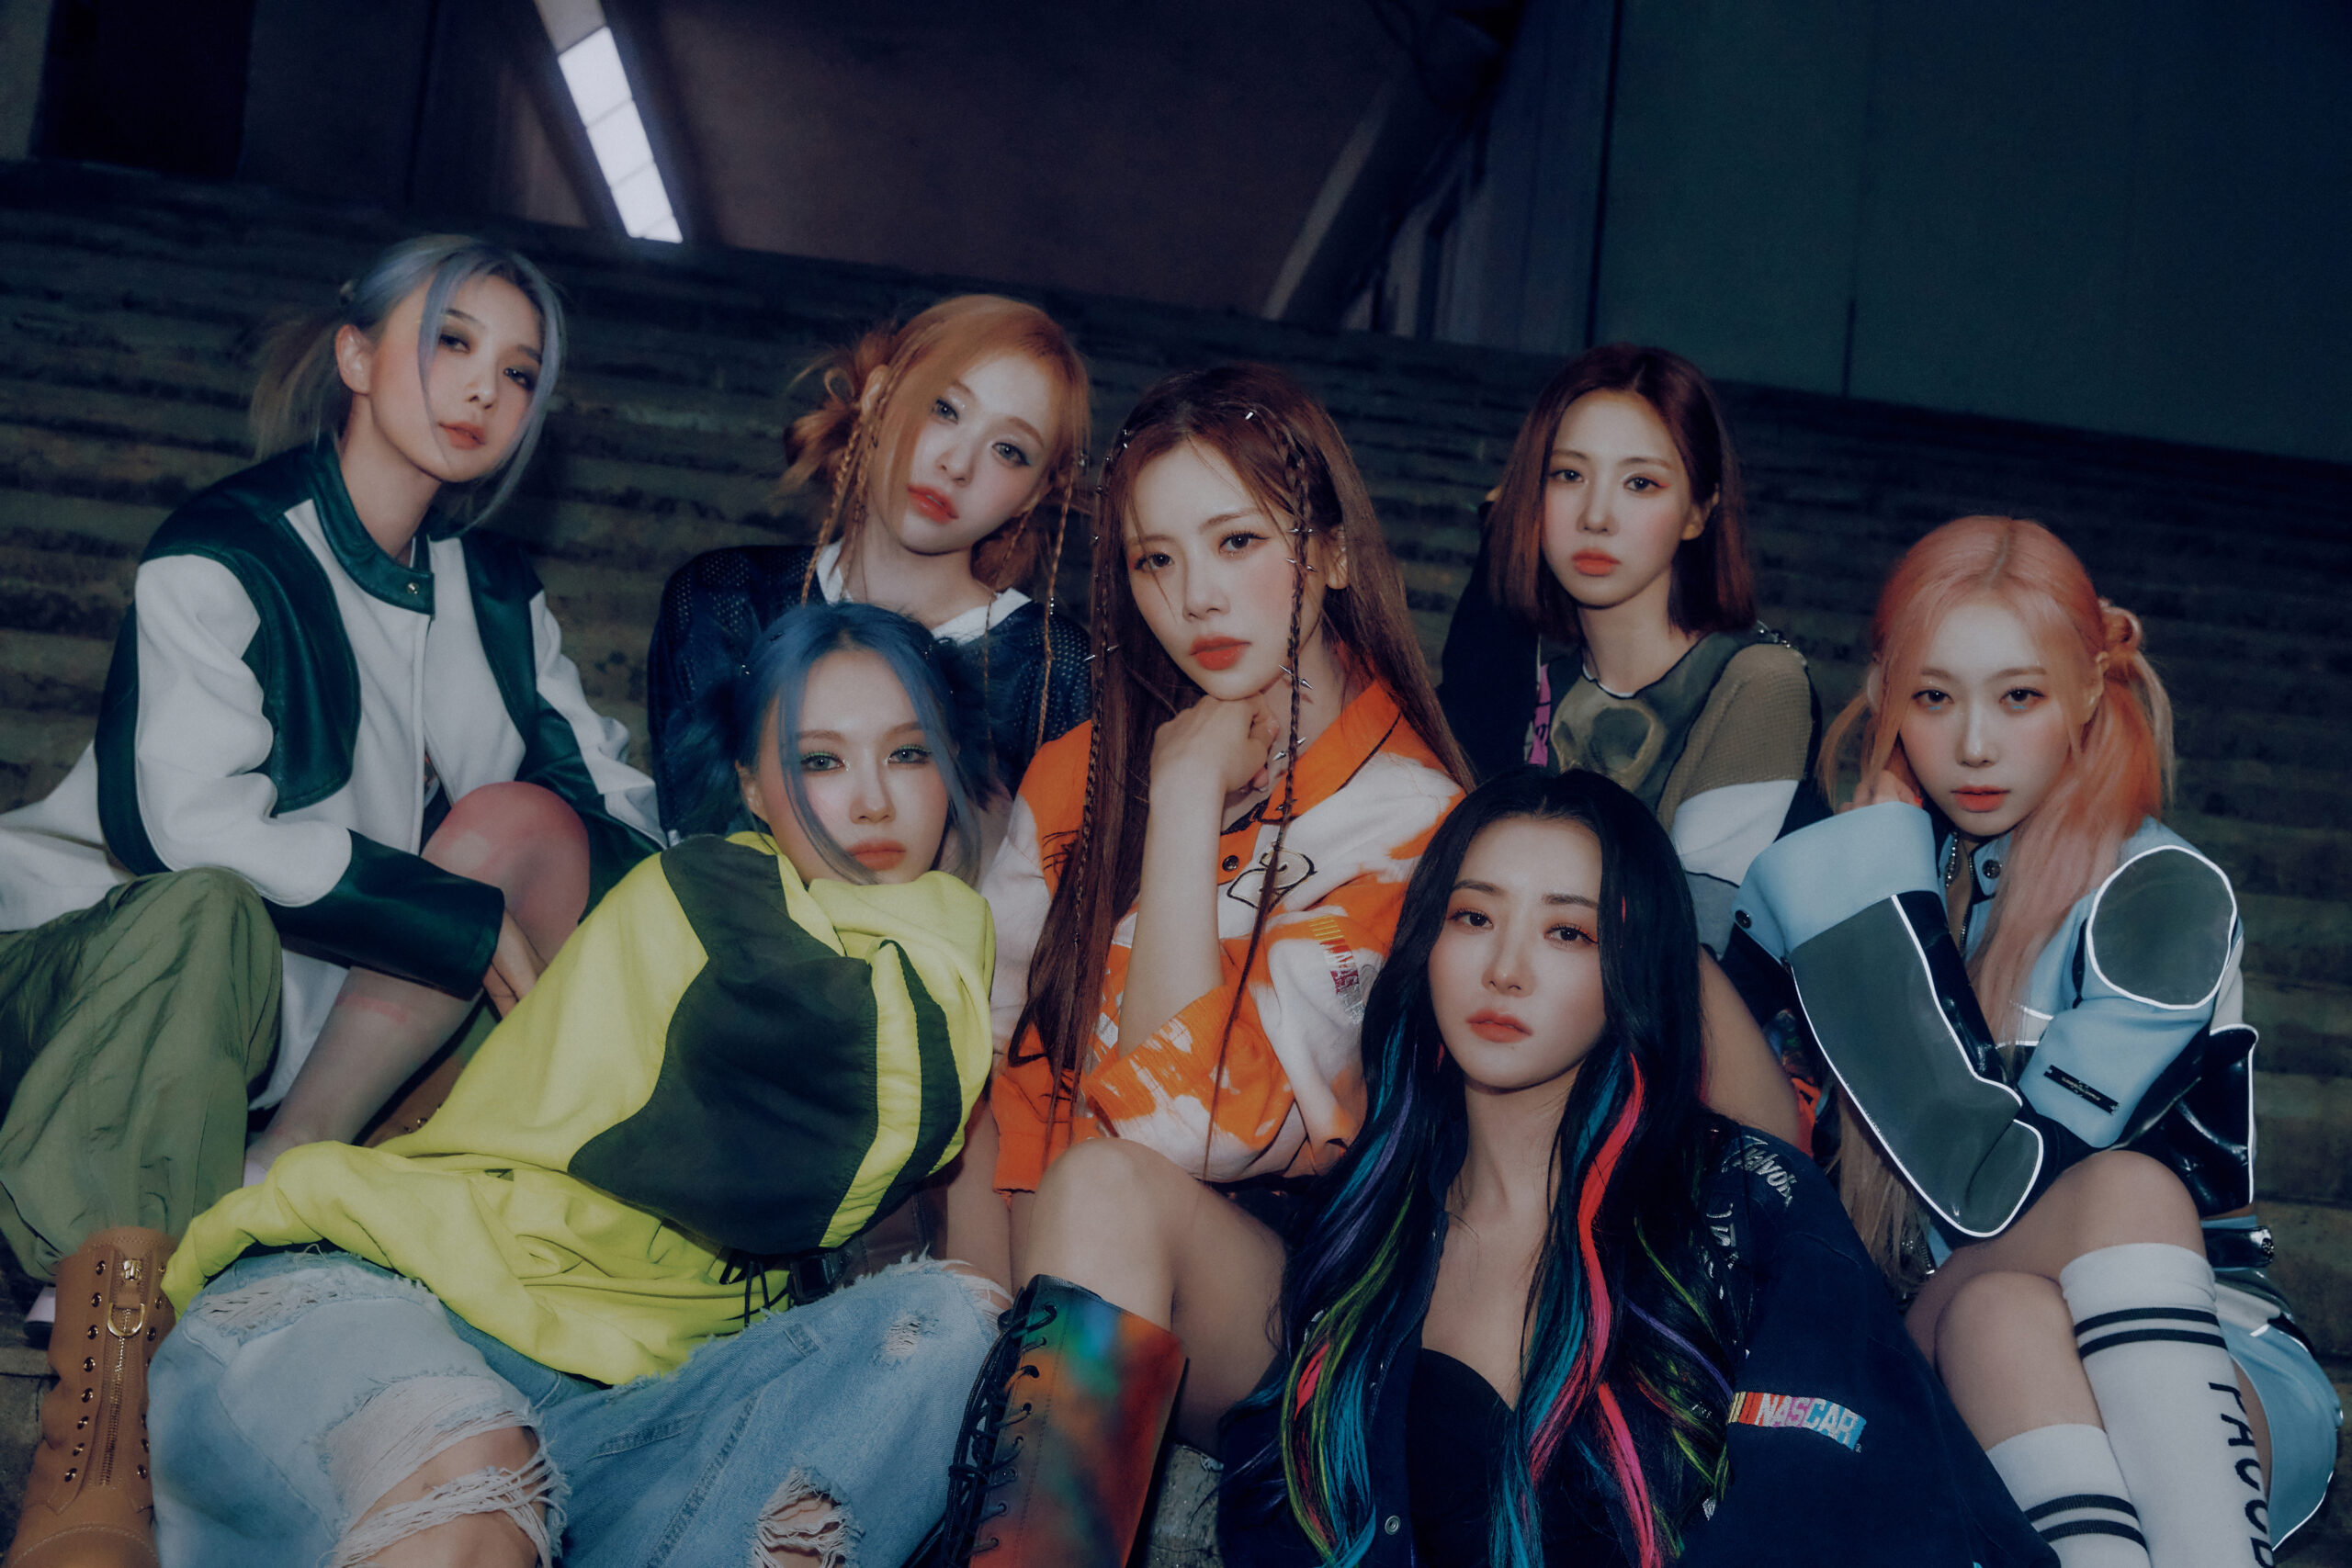 Dreamcatcher to Return to Manila for “Under the Moonlight” Concert in August